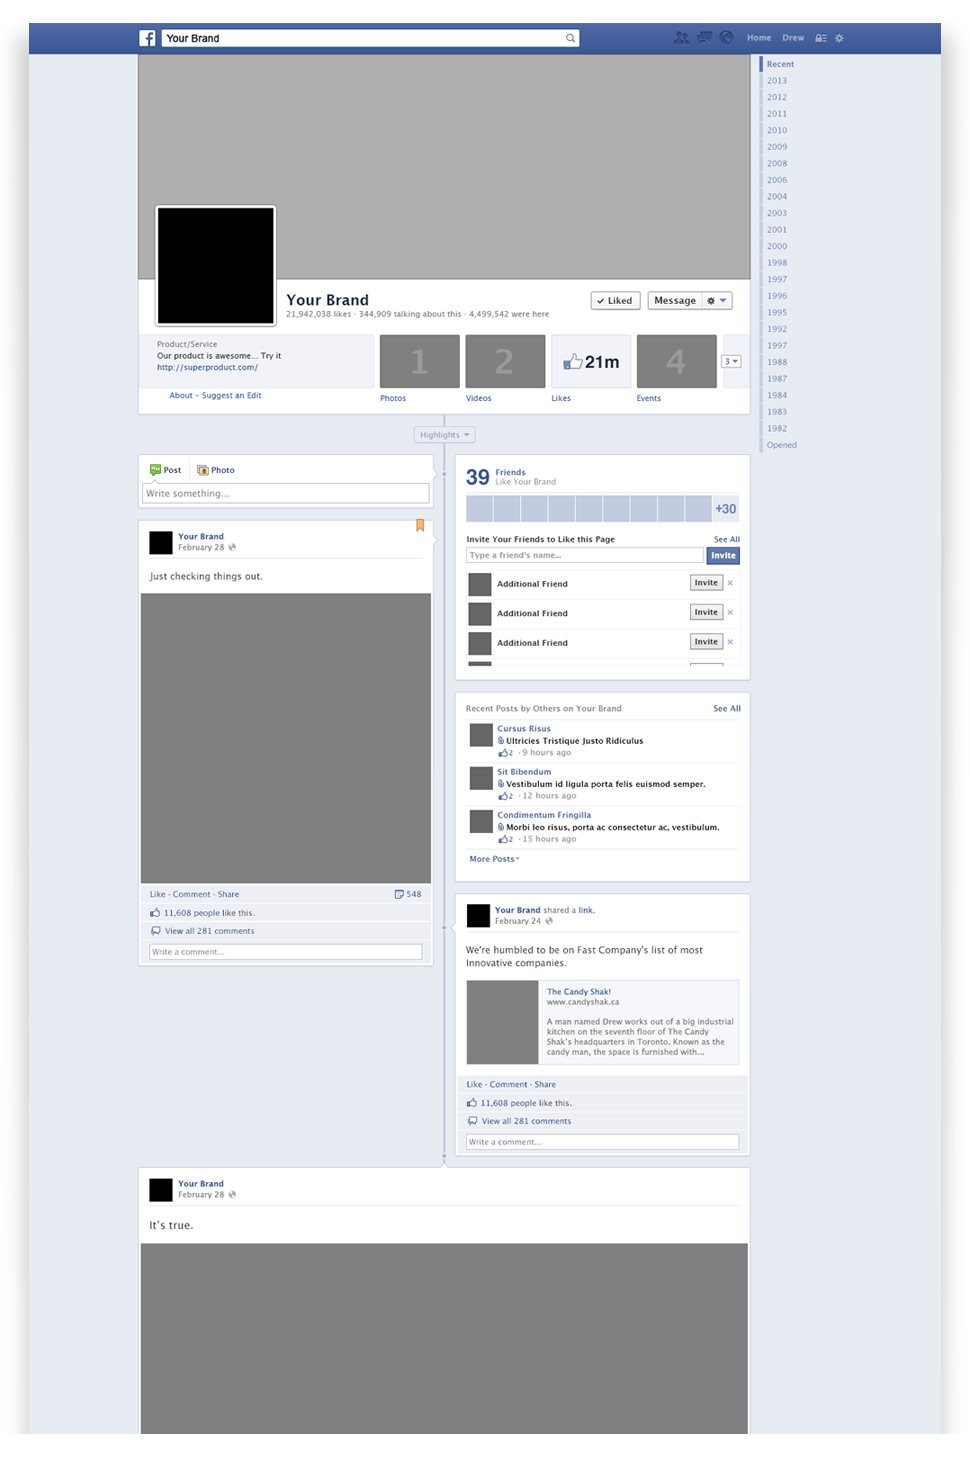 blank facebook profile page layout